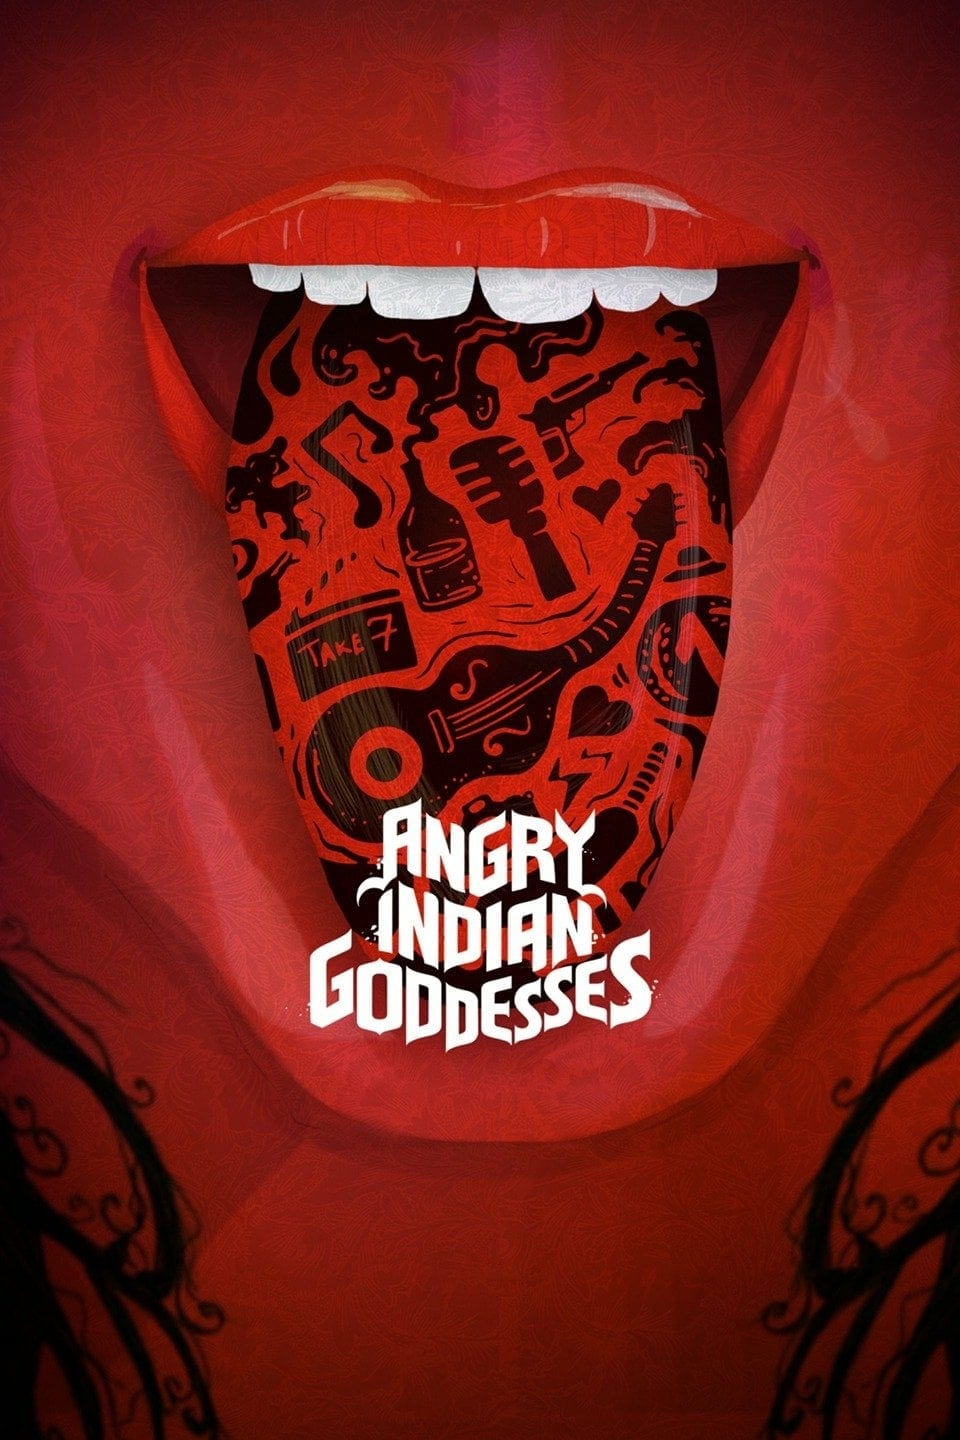 Poster for the movie "Angry Indian Goddesses"